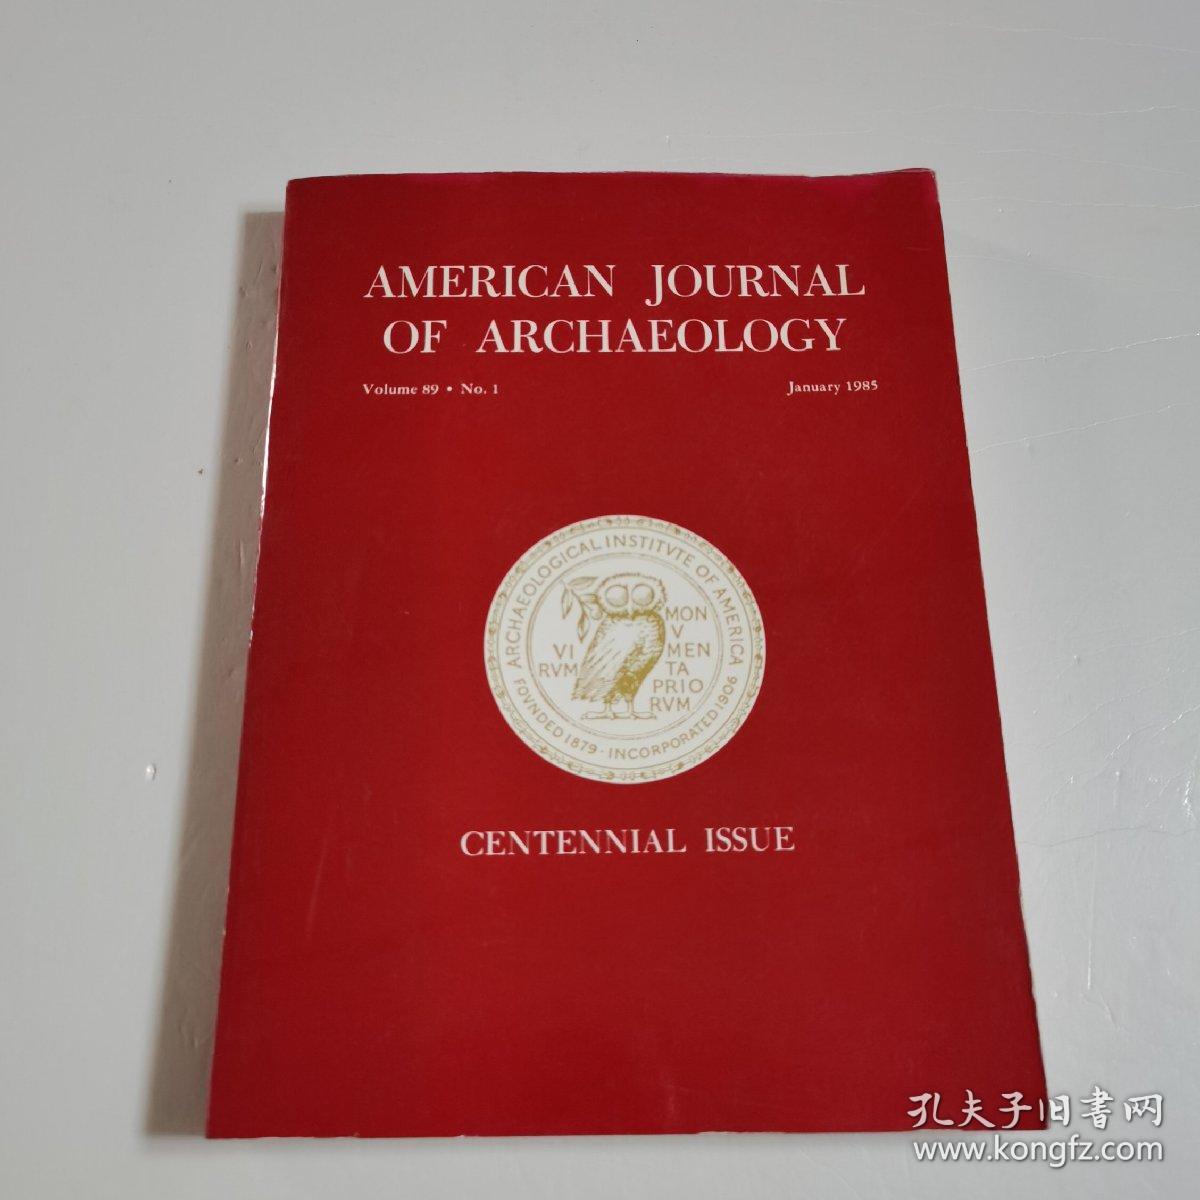 AMERICAN JOURNAL OF ARCHAEOLOGY